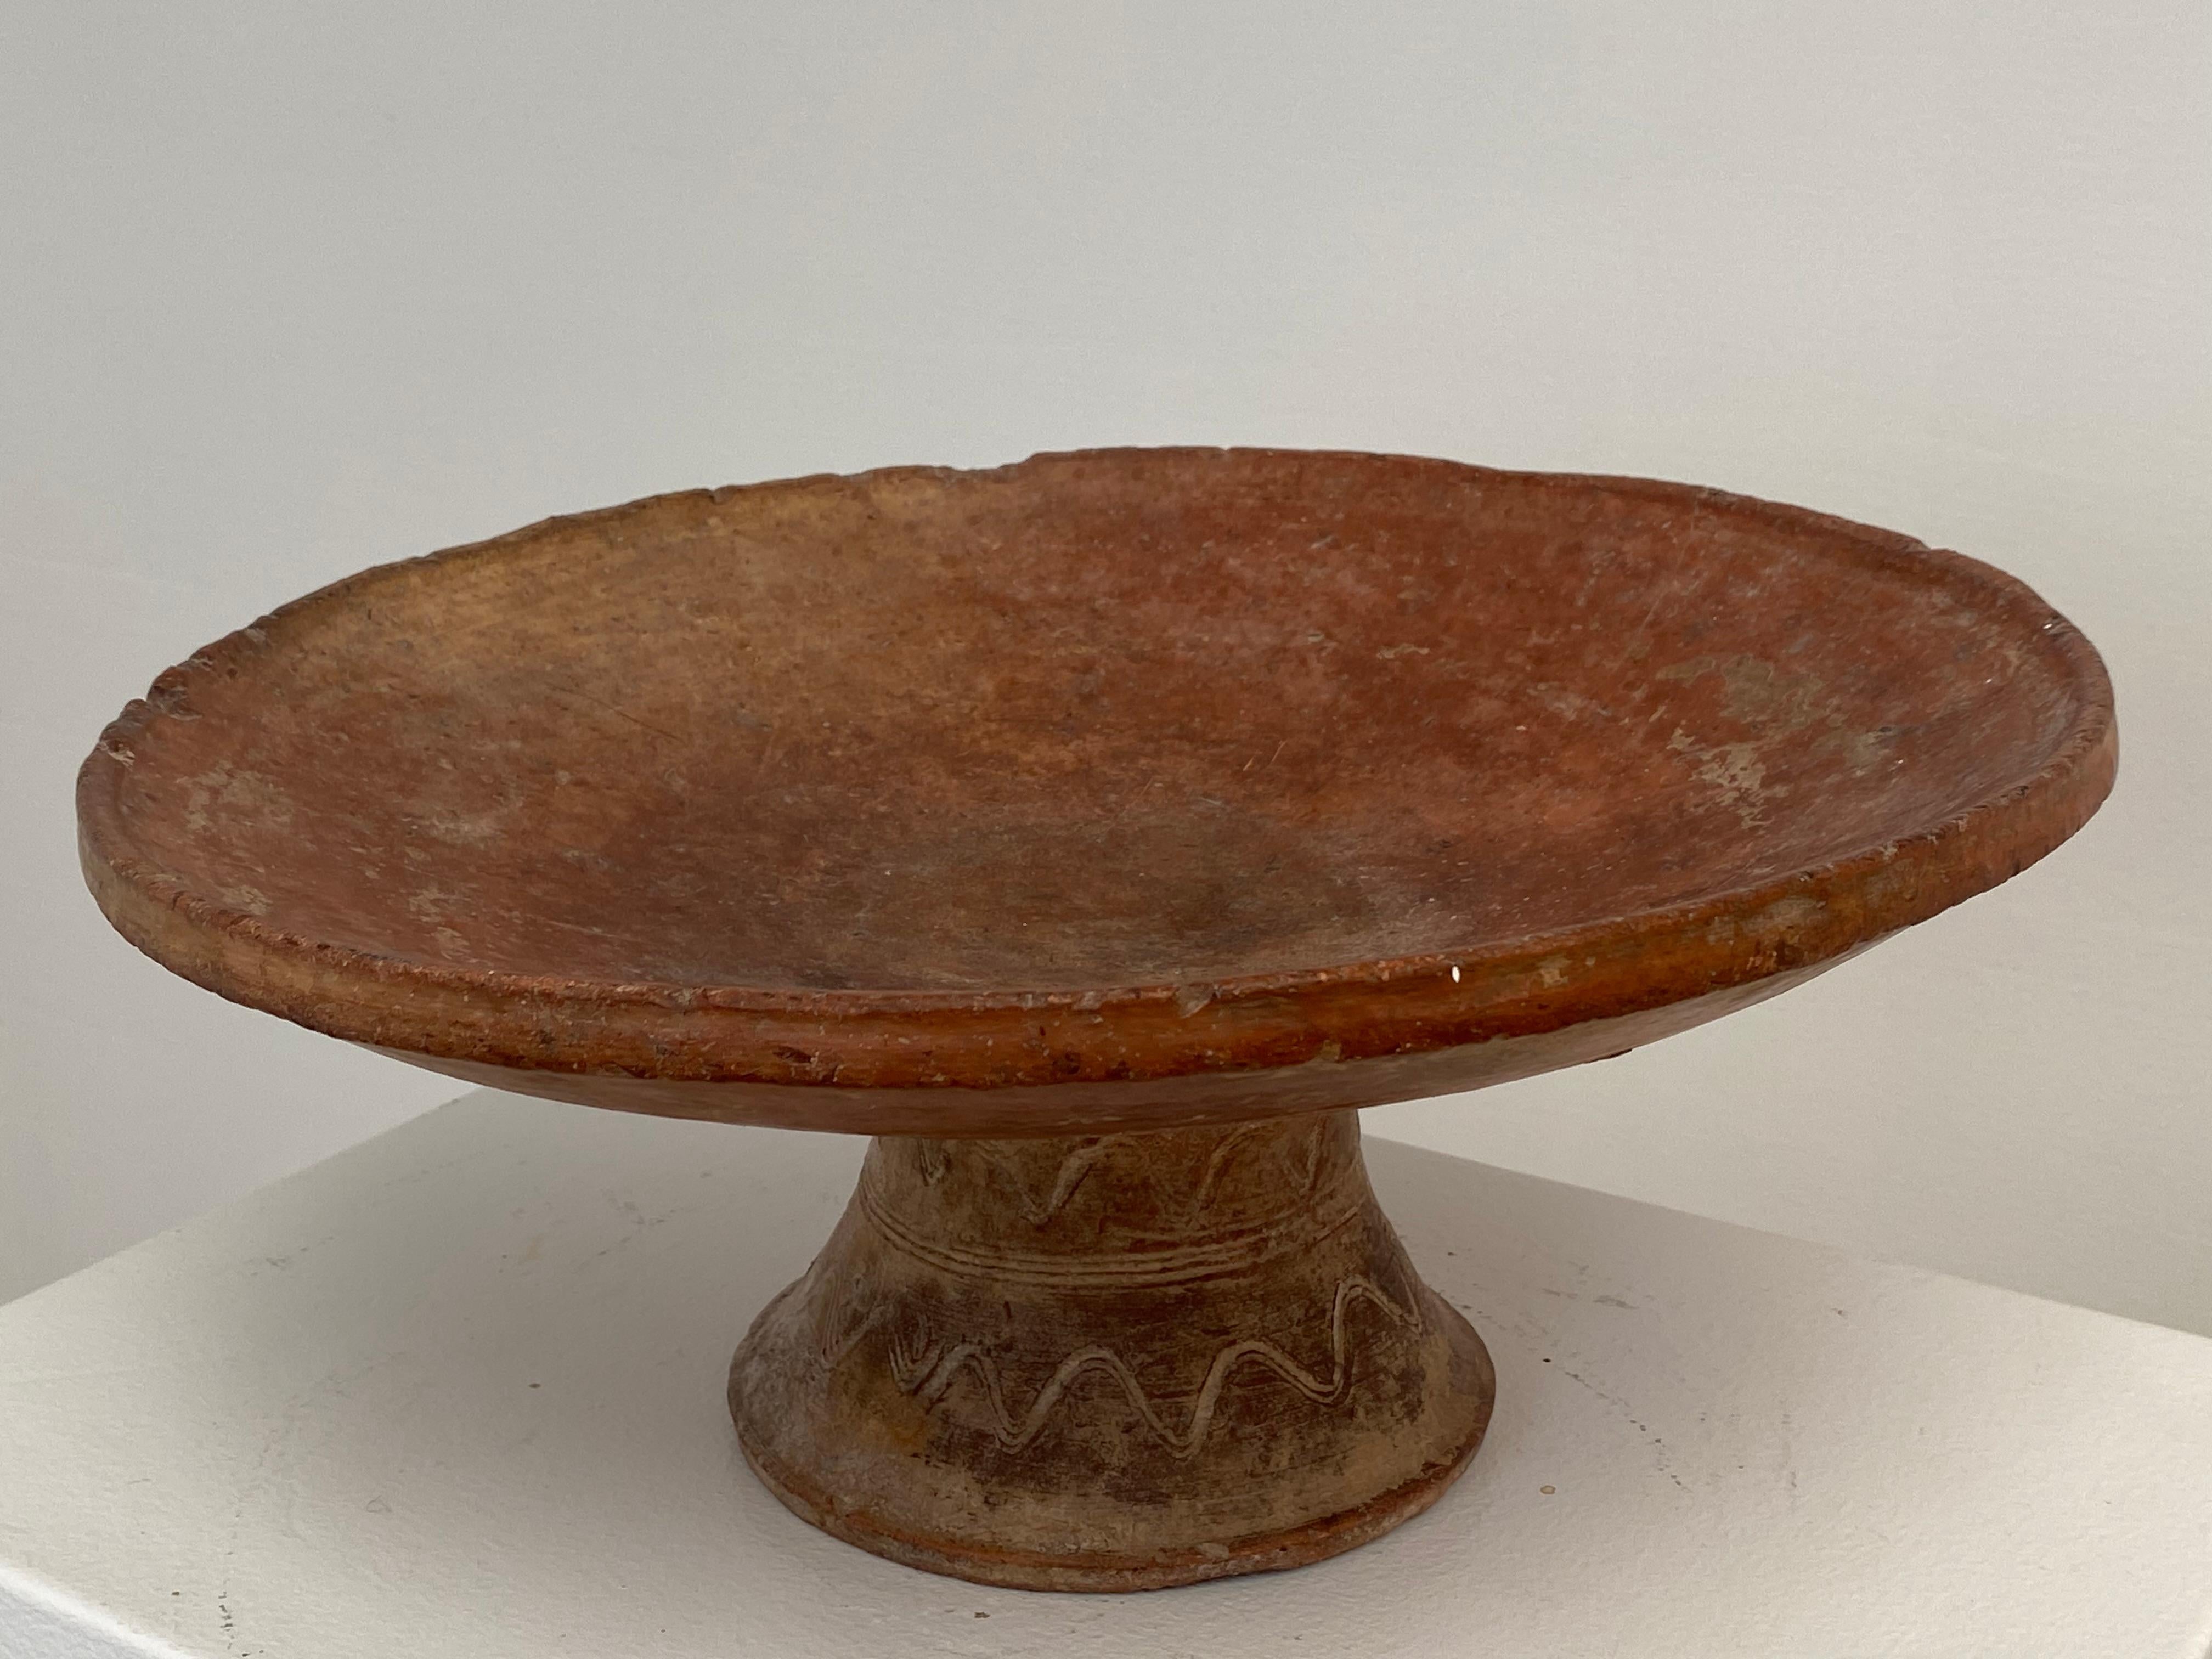 Antique Berber Terracotta Bowl on a central foot For Sale 1